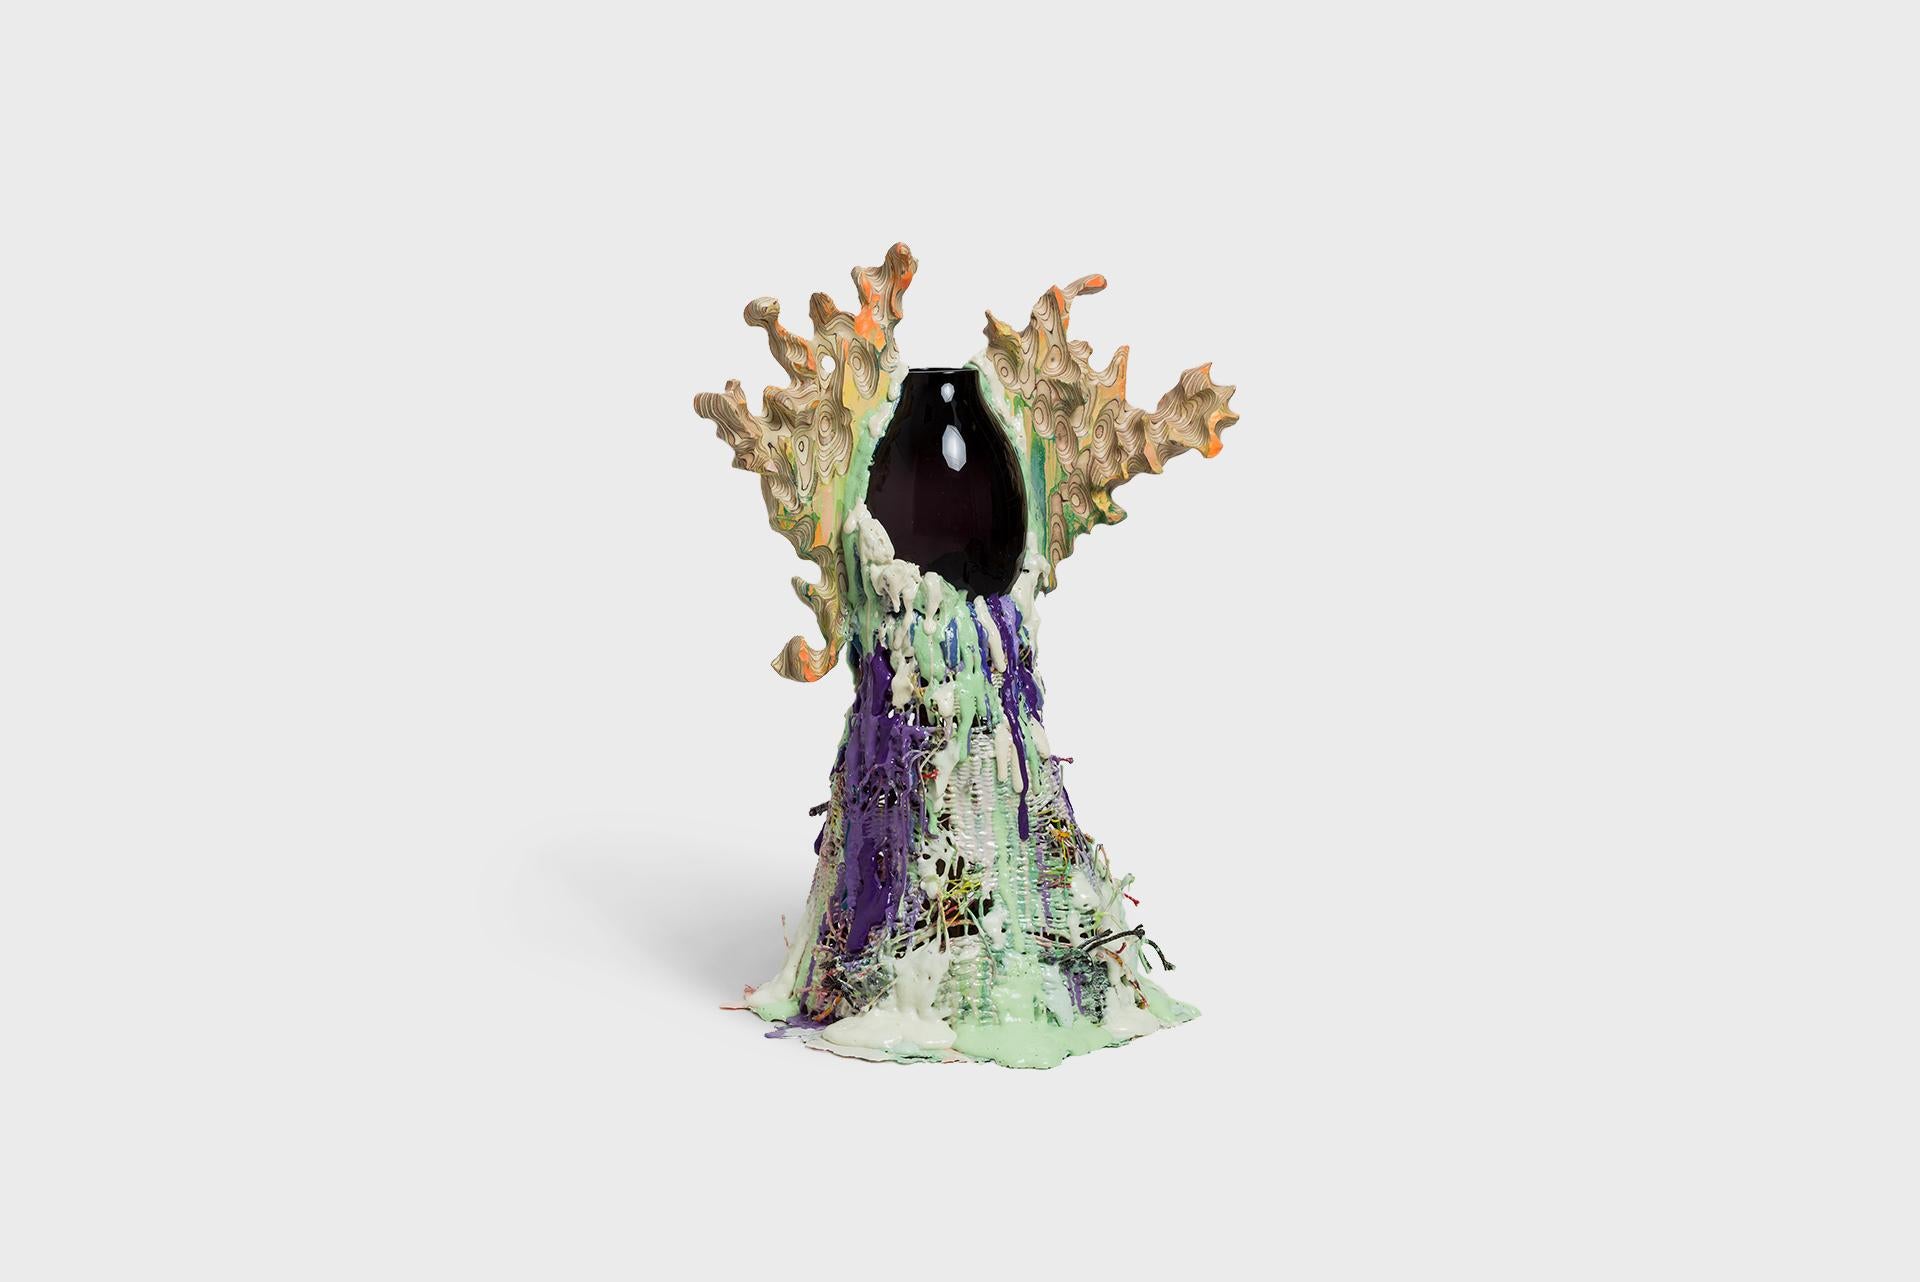 Carved Contemporary Glass Vase by Tadeas Podracky from the Series “The Metamorphosis” For Sale